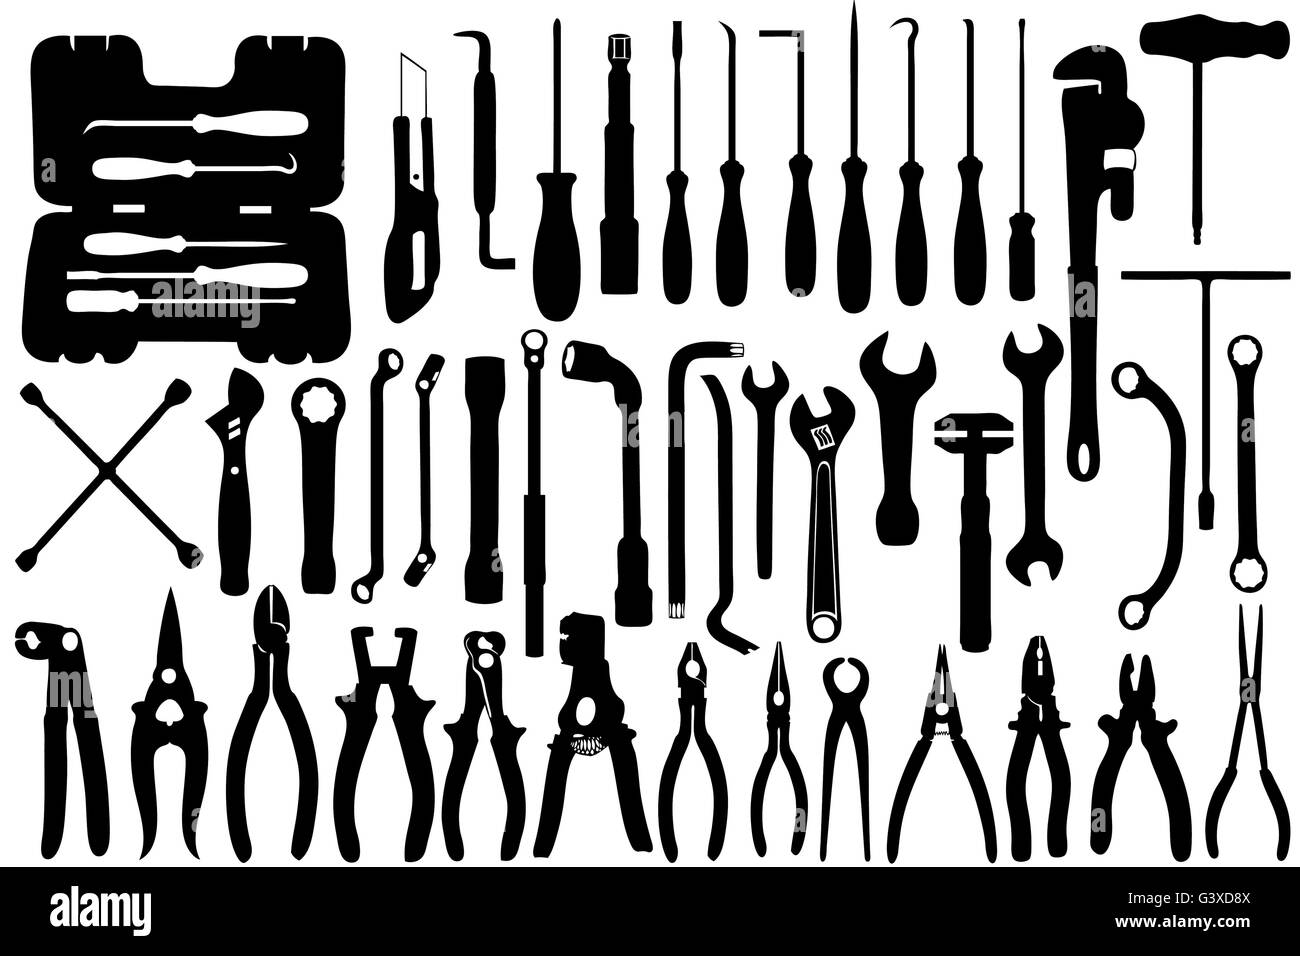 Hand tools isolated on white Stock Vector